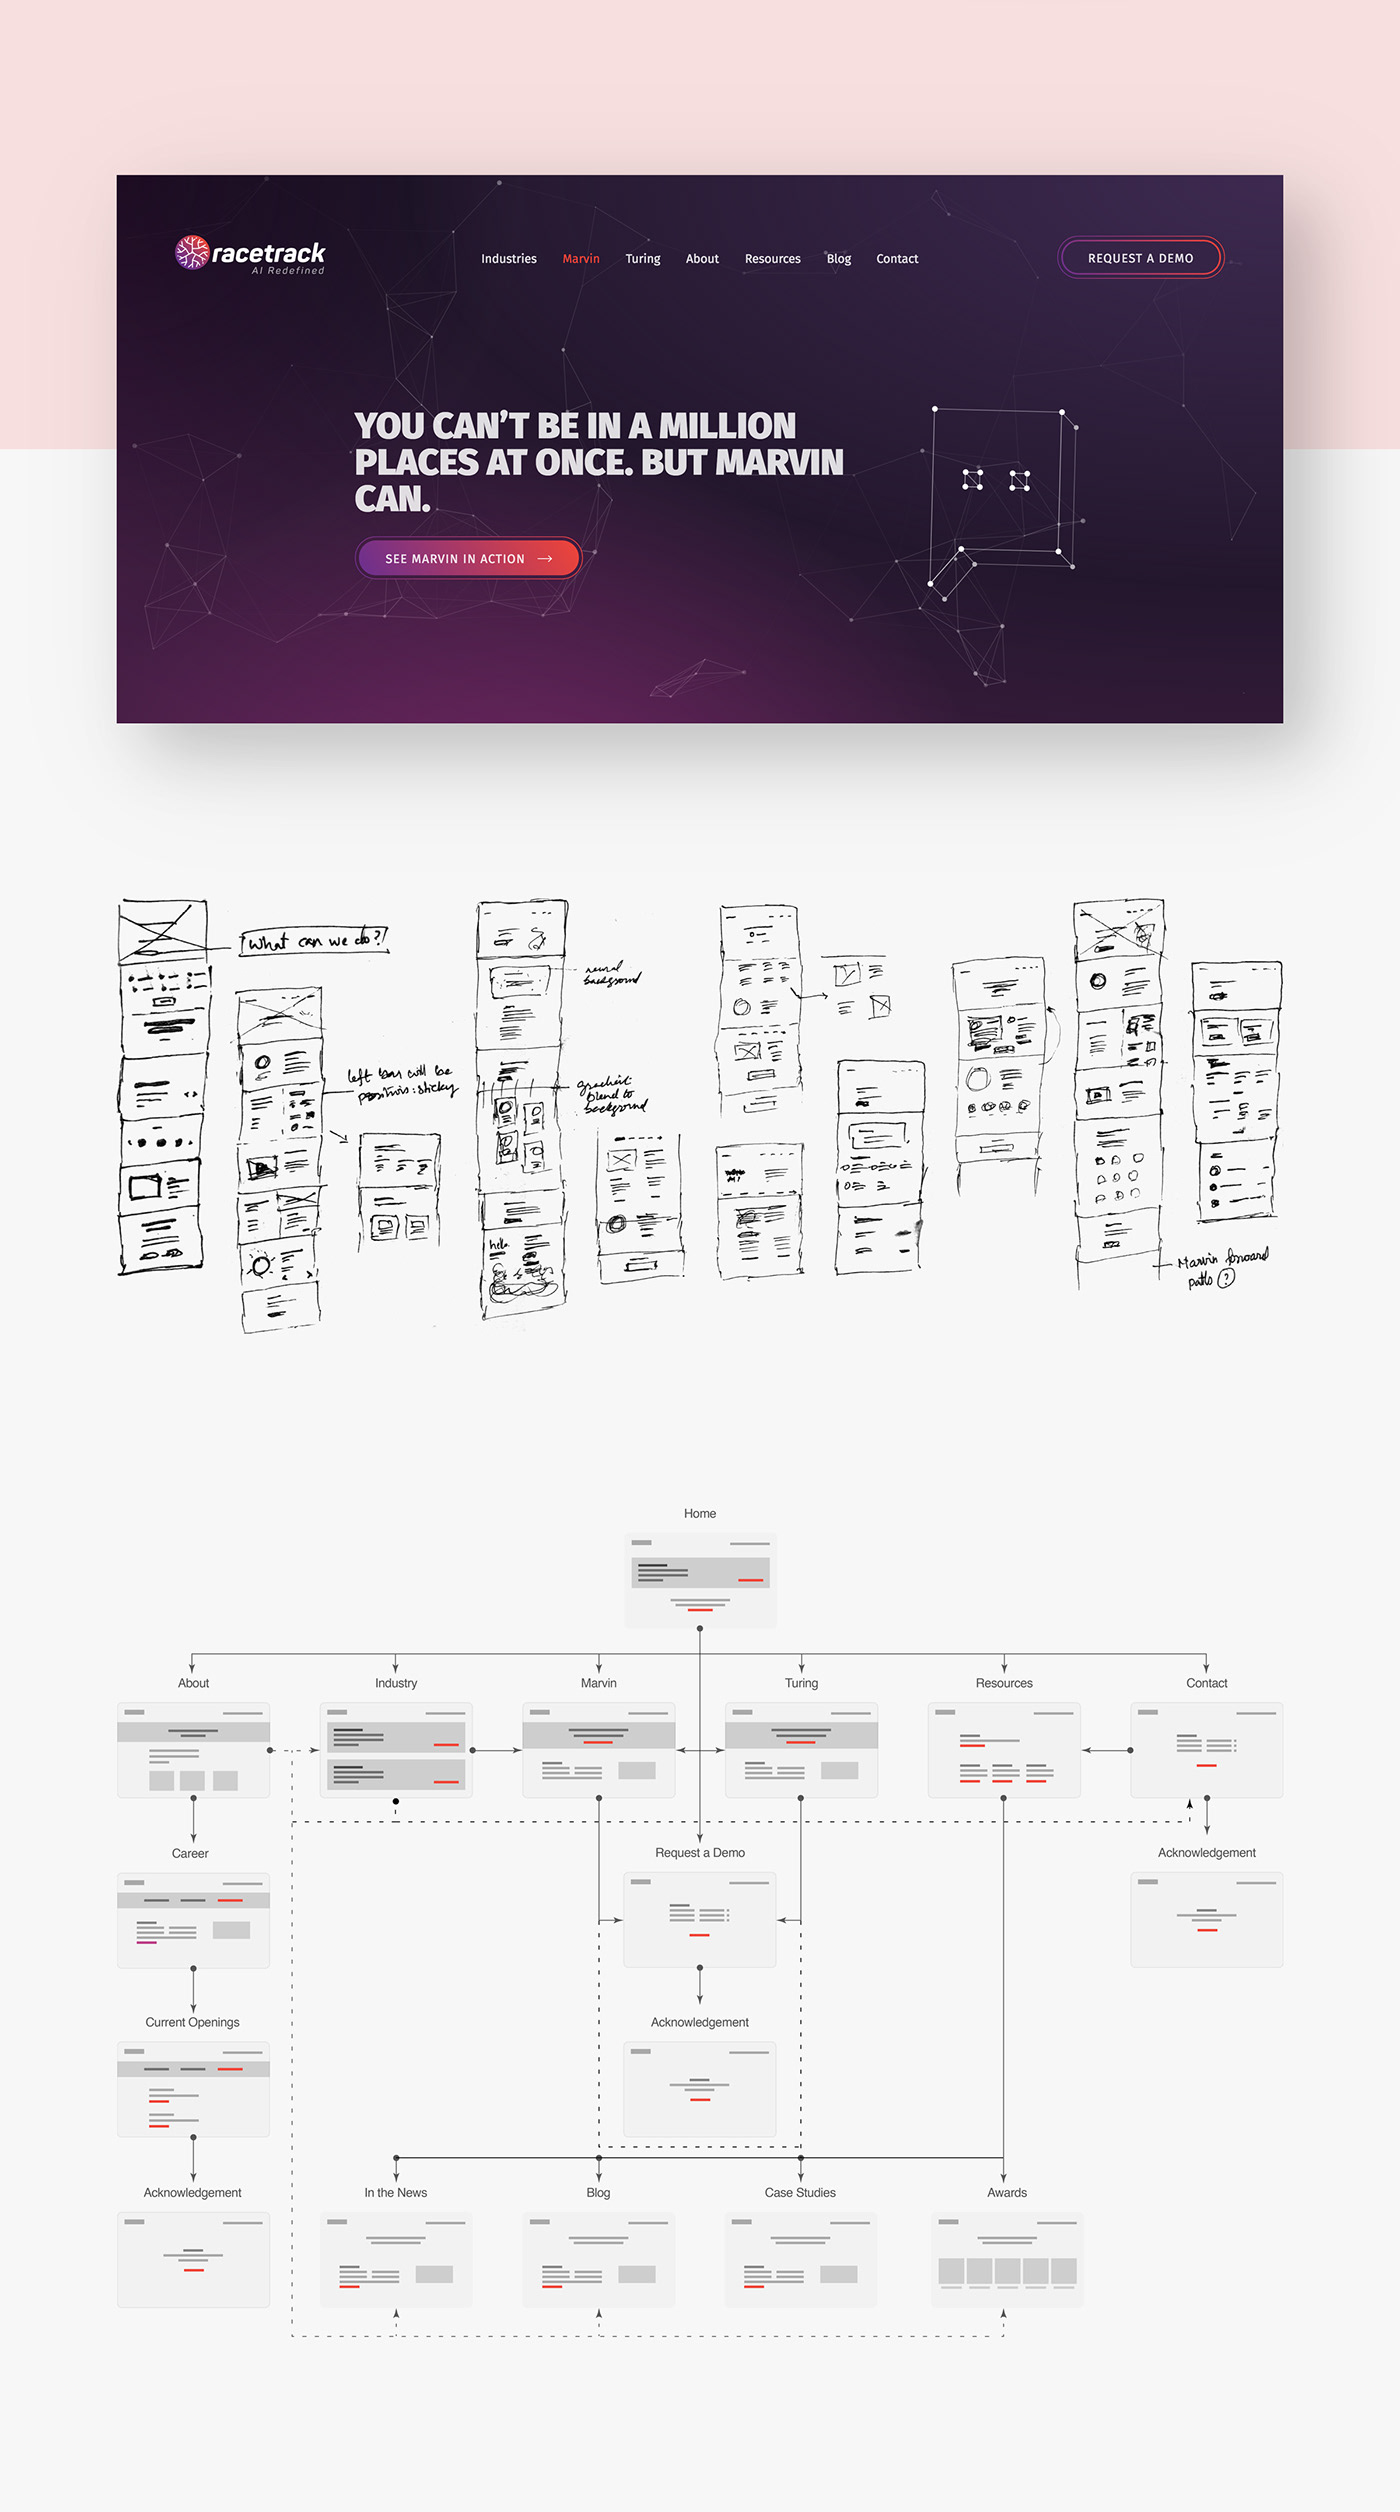 Marvin page screenshot, website sketches and sitemap.